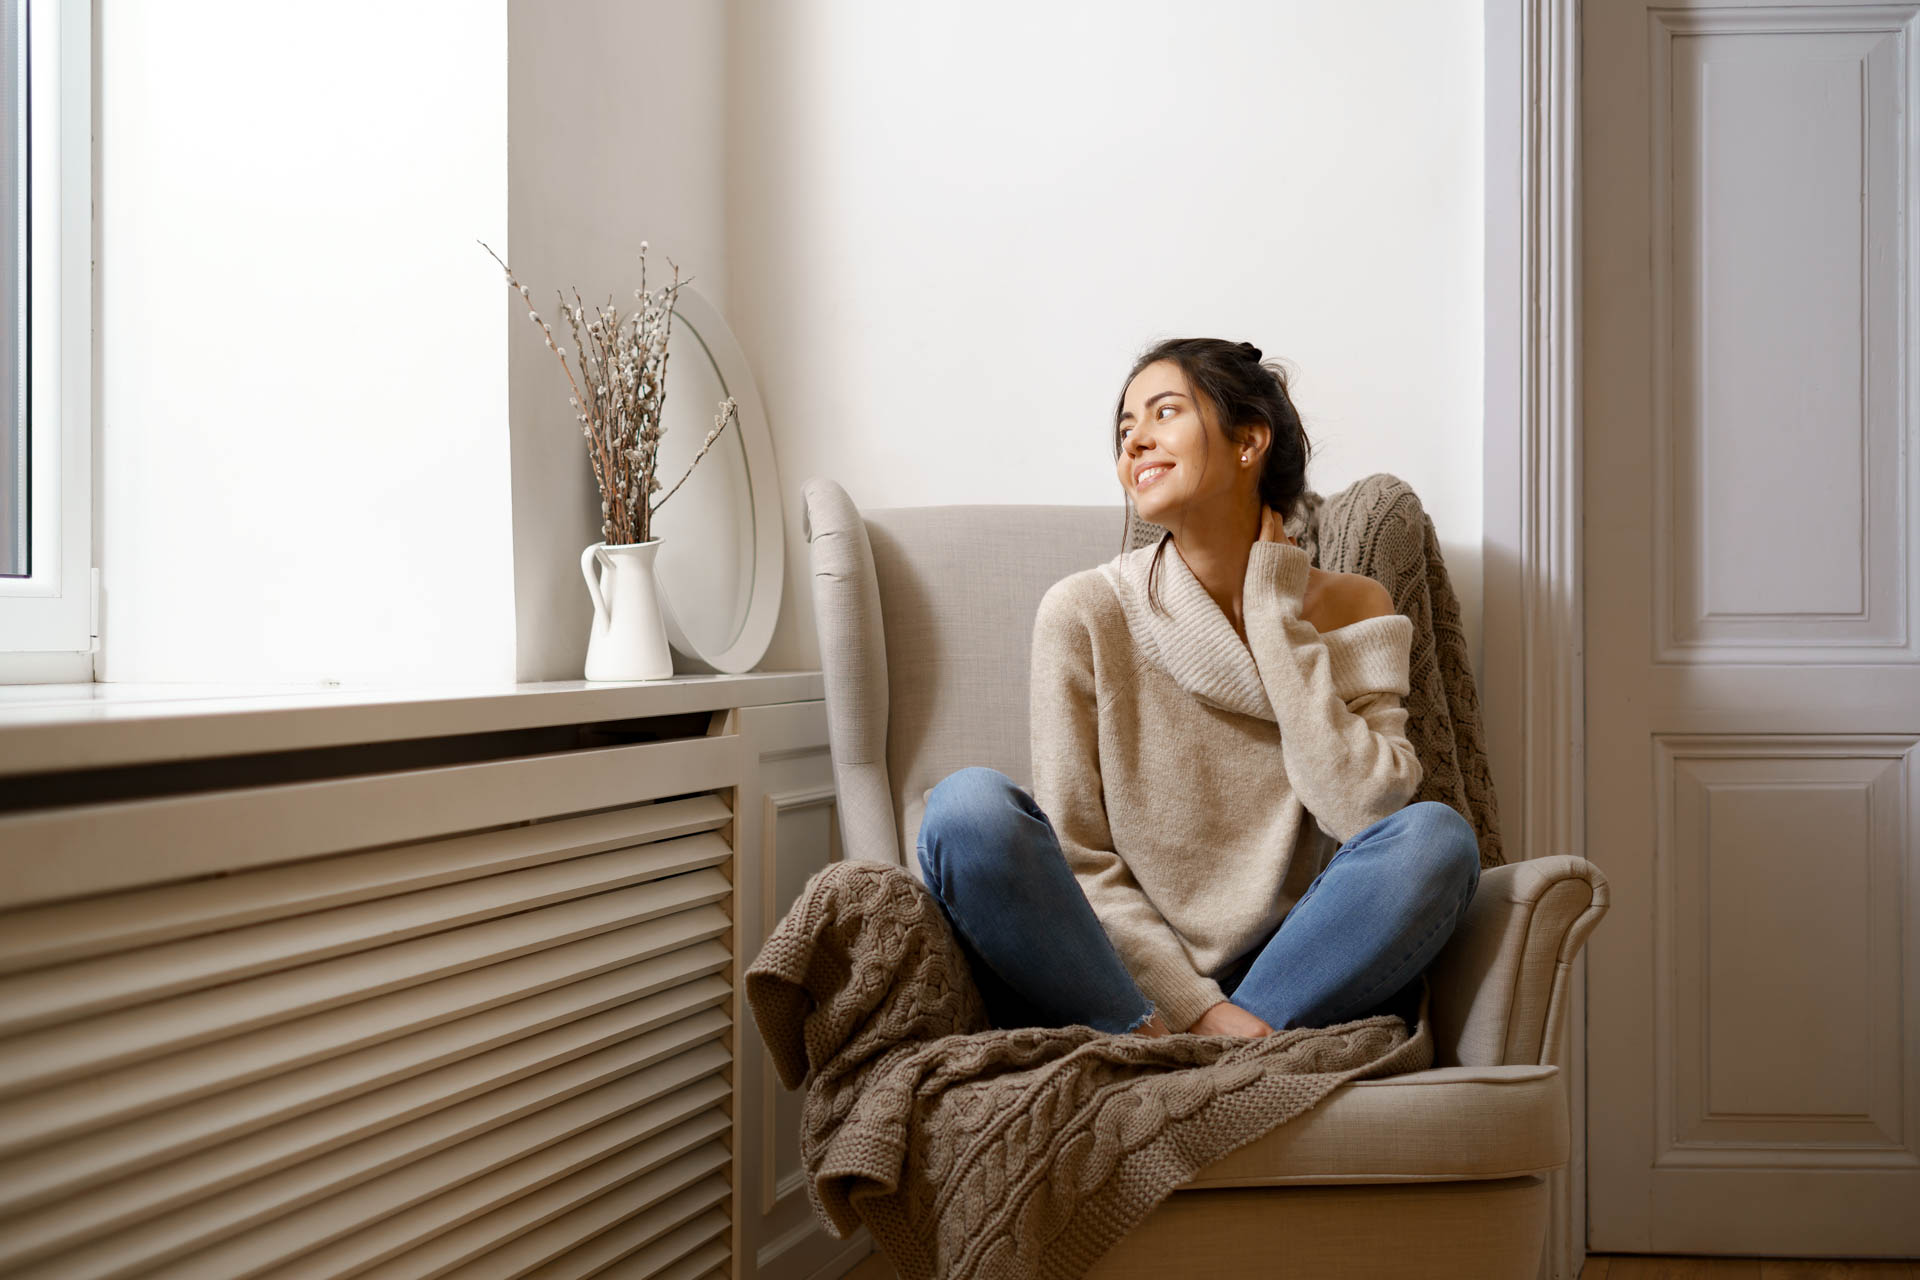 A woman sitting in a cozy armchair by the window, smiling and gazing outside, draped in a beige sweater and wrapped in a brown blanket, contentedly overlooking the heating and cooling repairs happening outdoors.